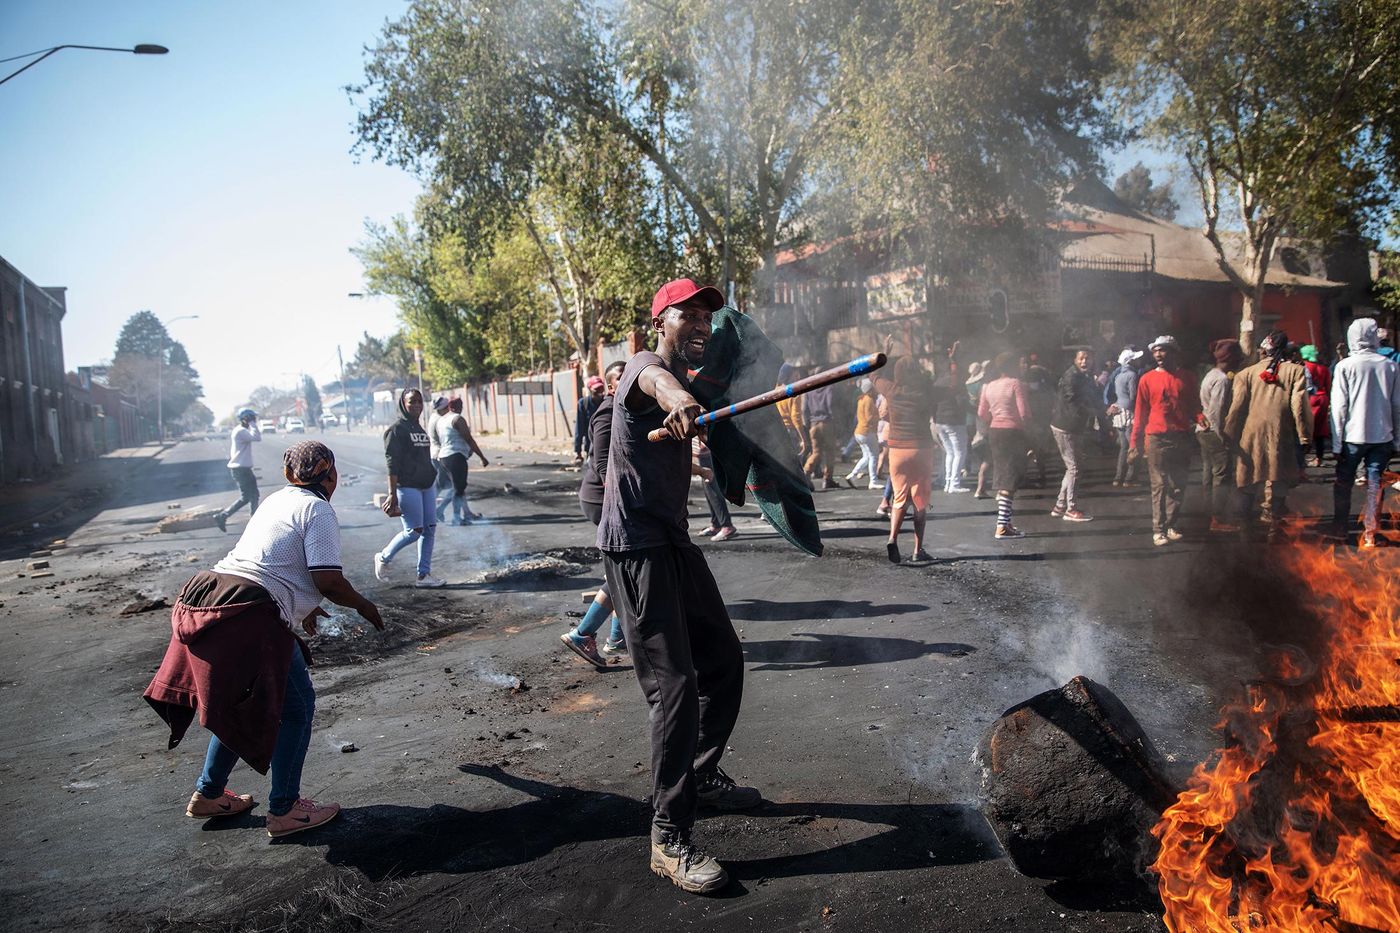 A man holds a stick in front of burning furniture in the streets during riots in Johannesburg, SA.  
Credit: Getty Images